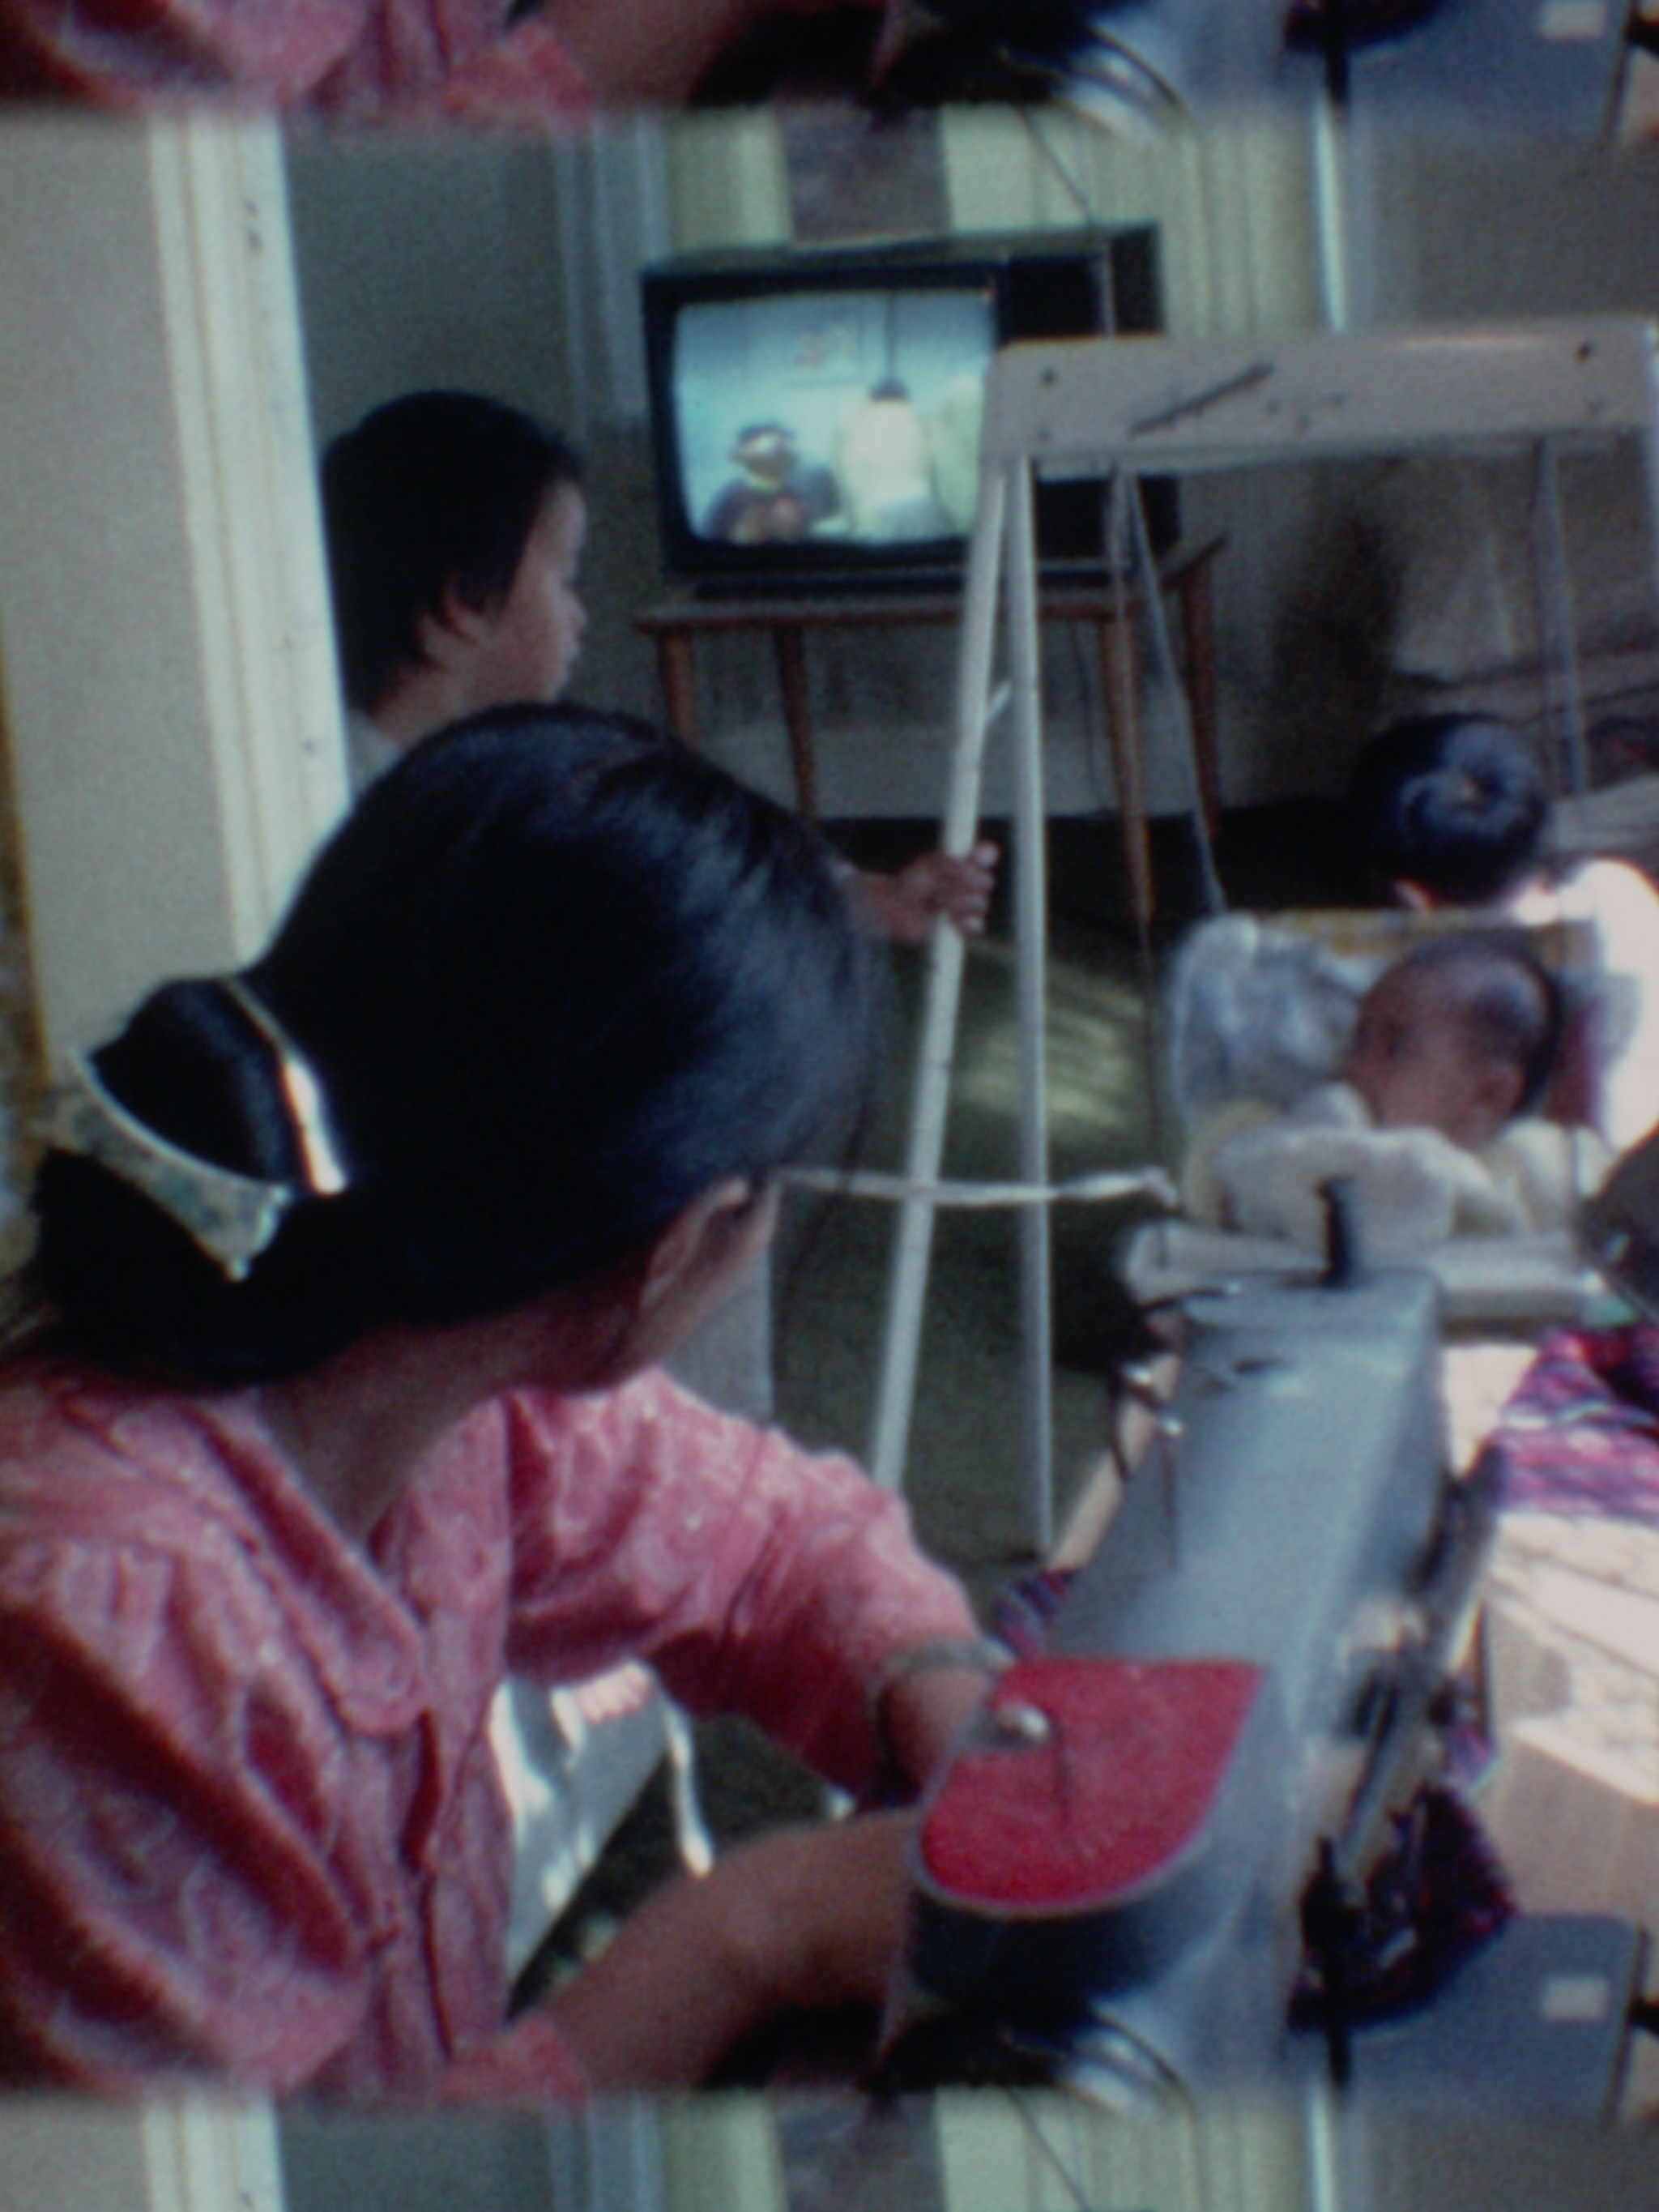 A Vietnamese woman sits at her sewing machine, facing away from the camera, her smooth black hair gathered in a low bun, fastened with a gold clip and white, bow-shaped barrette. The woman’s face is turned toward the living room toward three children: a baby in a swing, pulled by a rope in the hand of a young boy in profile, and the back of a young boy’s head. On a 13 inch box television,  which is perched on a wooden table, Burt and Ernie from Sesame Street are on the screen.